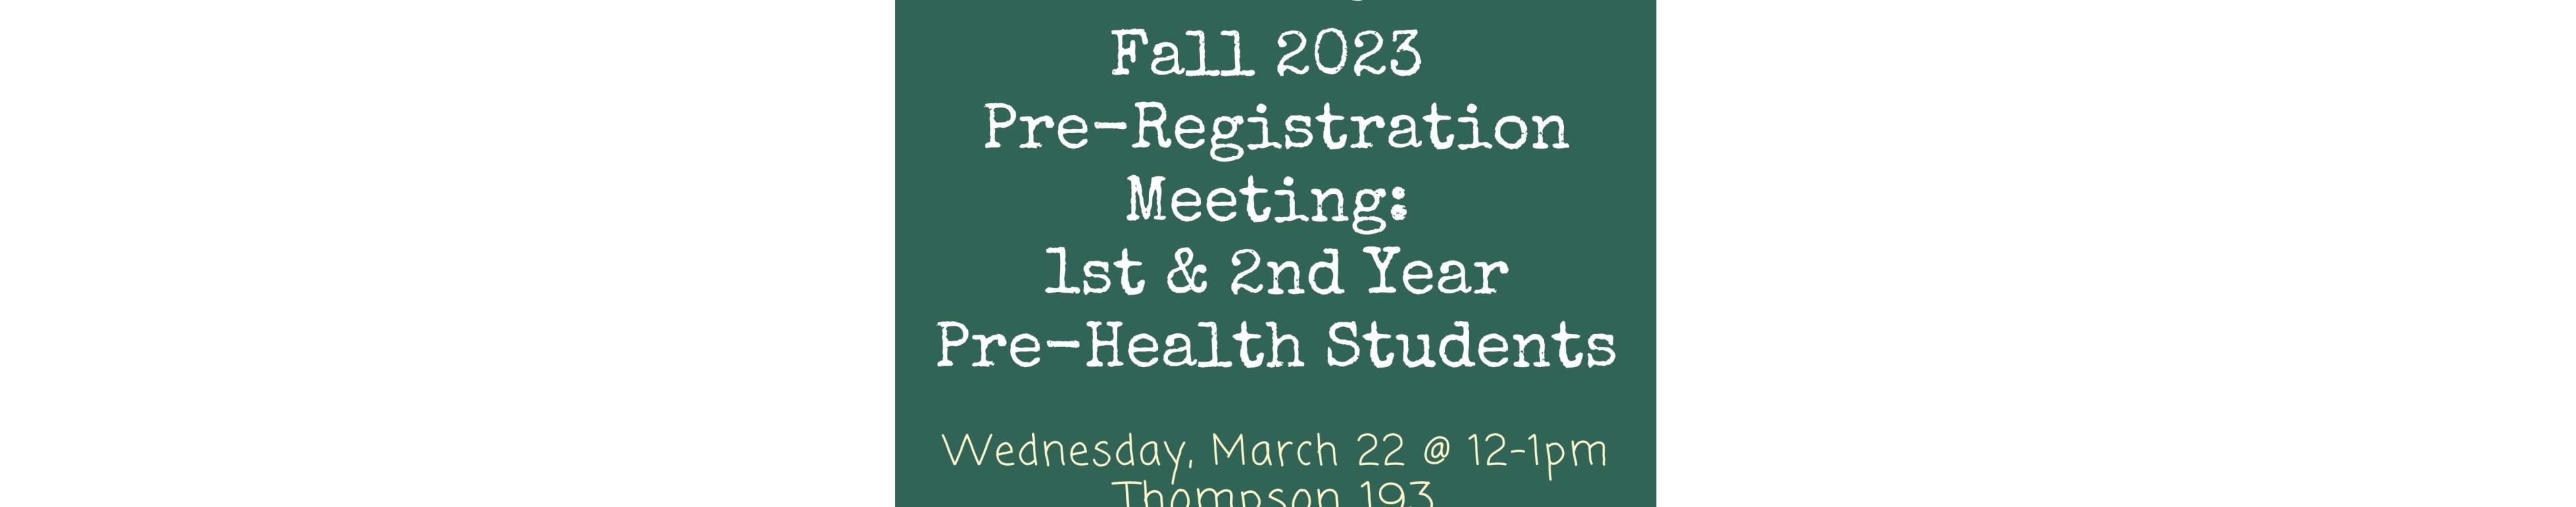 Health Professions Advising Pre-Registration Meeting poster